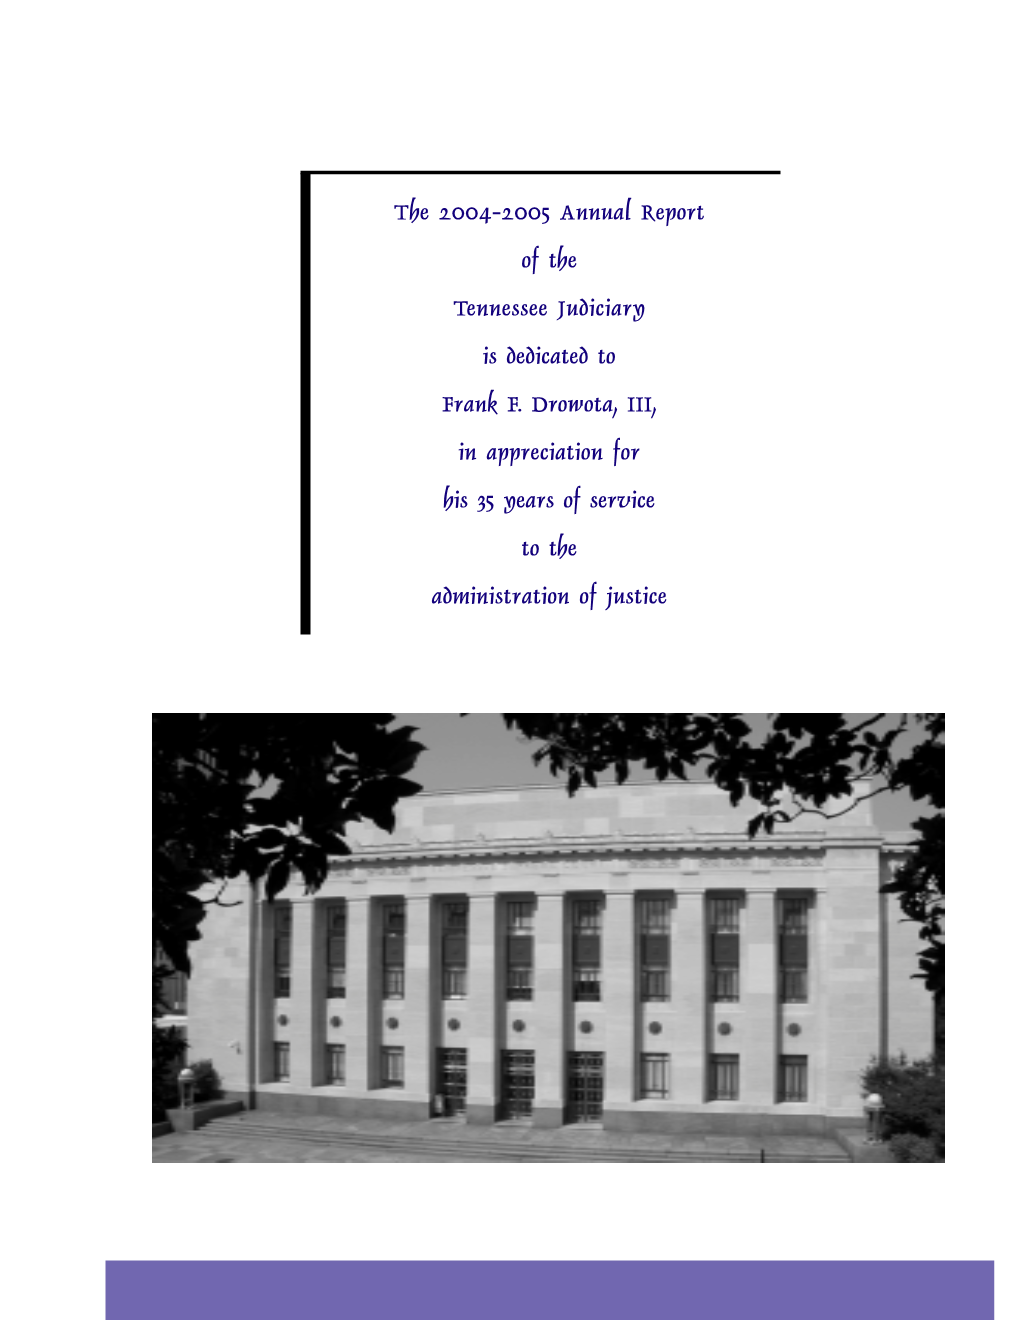 The 2004-2005 Annual Report of the Tennessee Judiciary Is Dedicated To